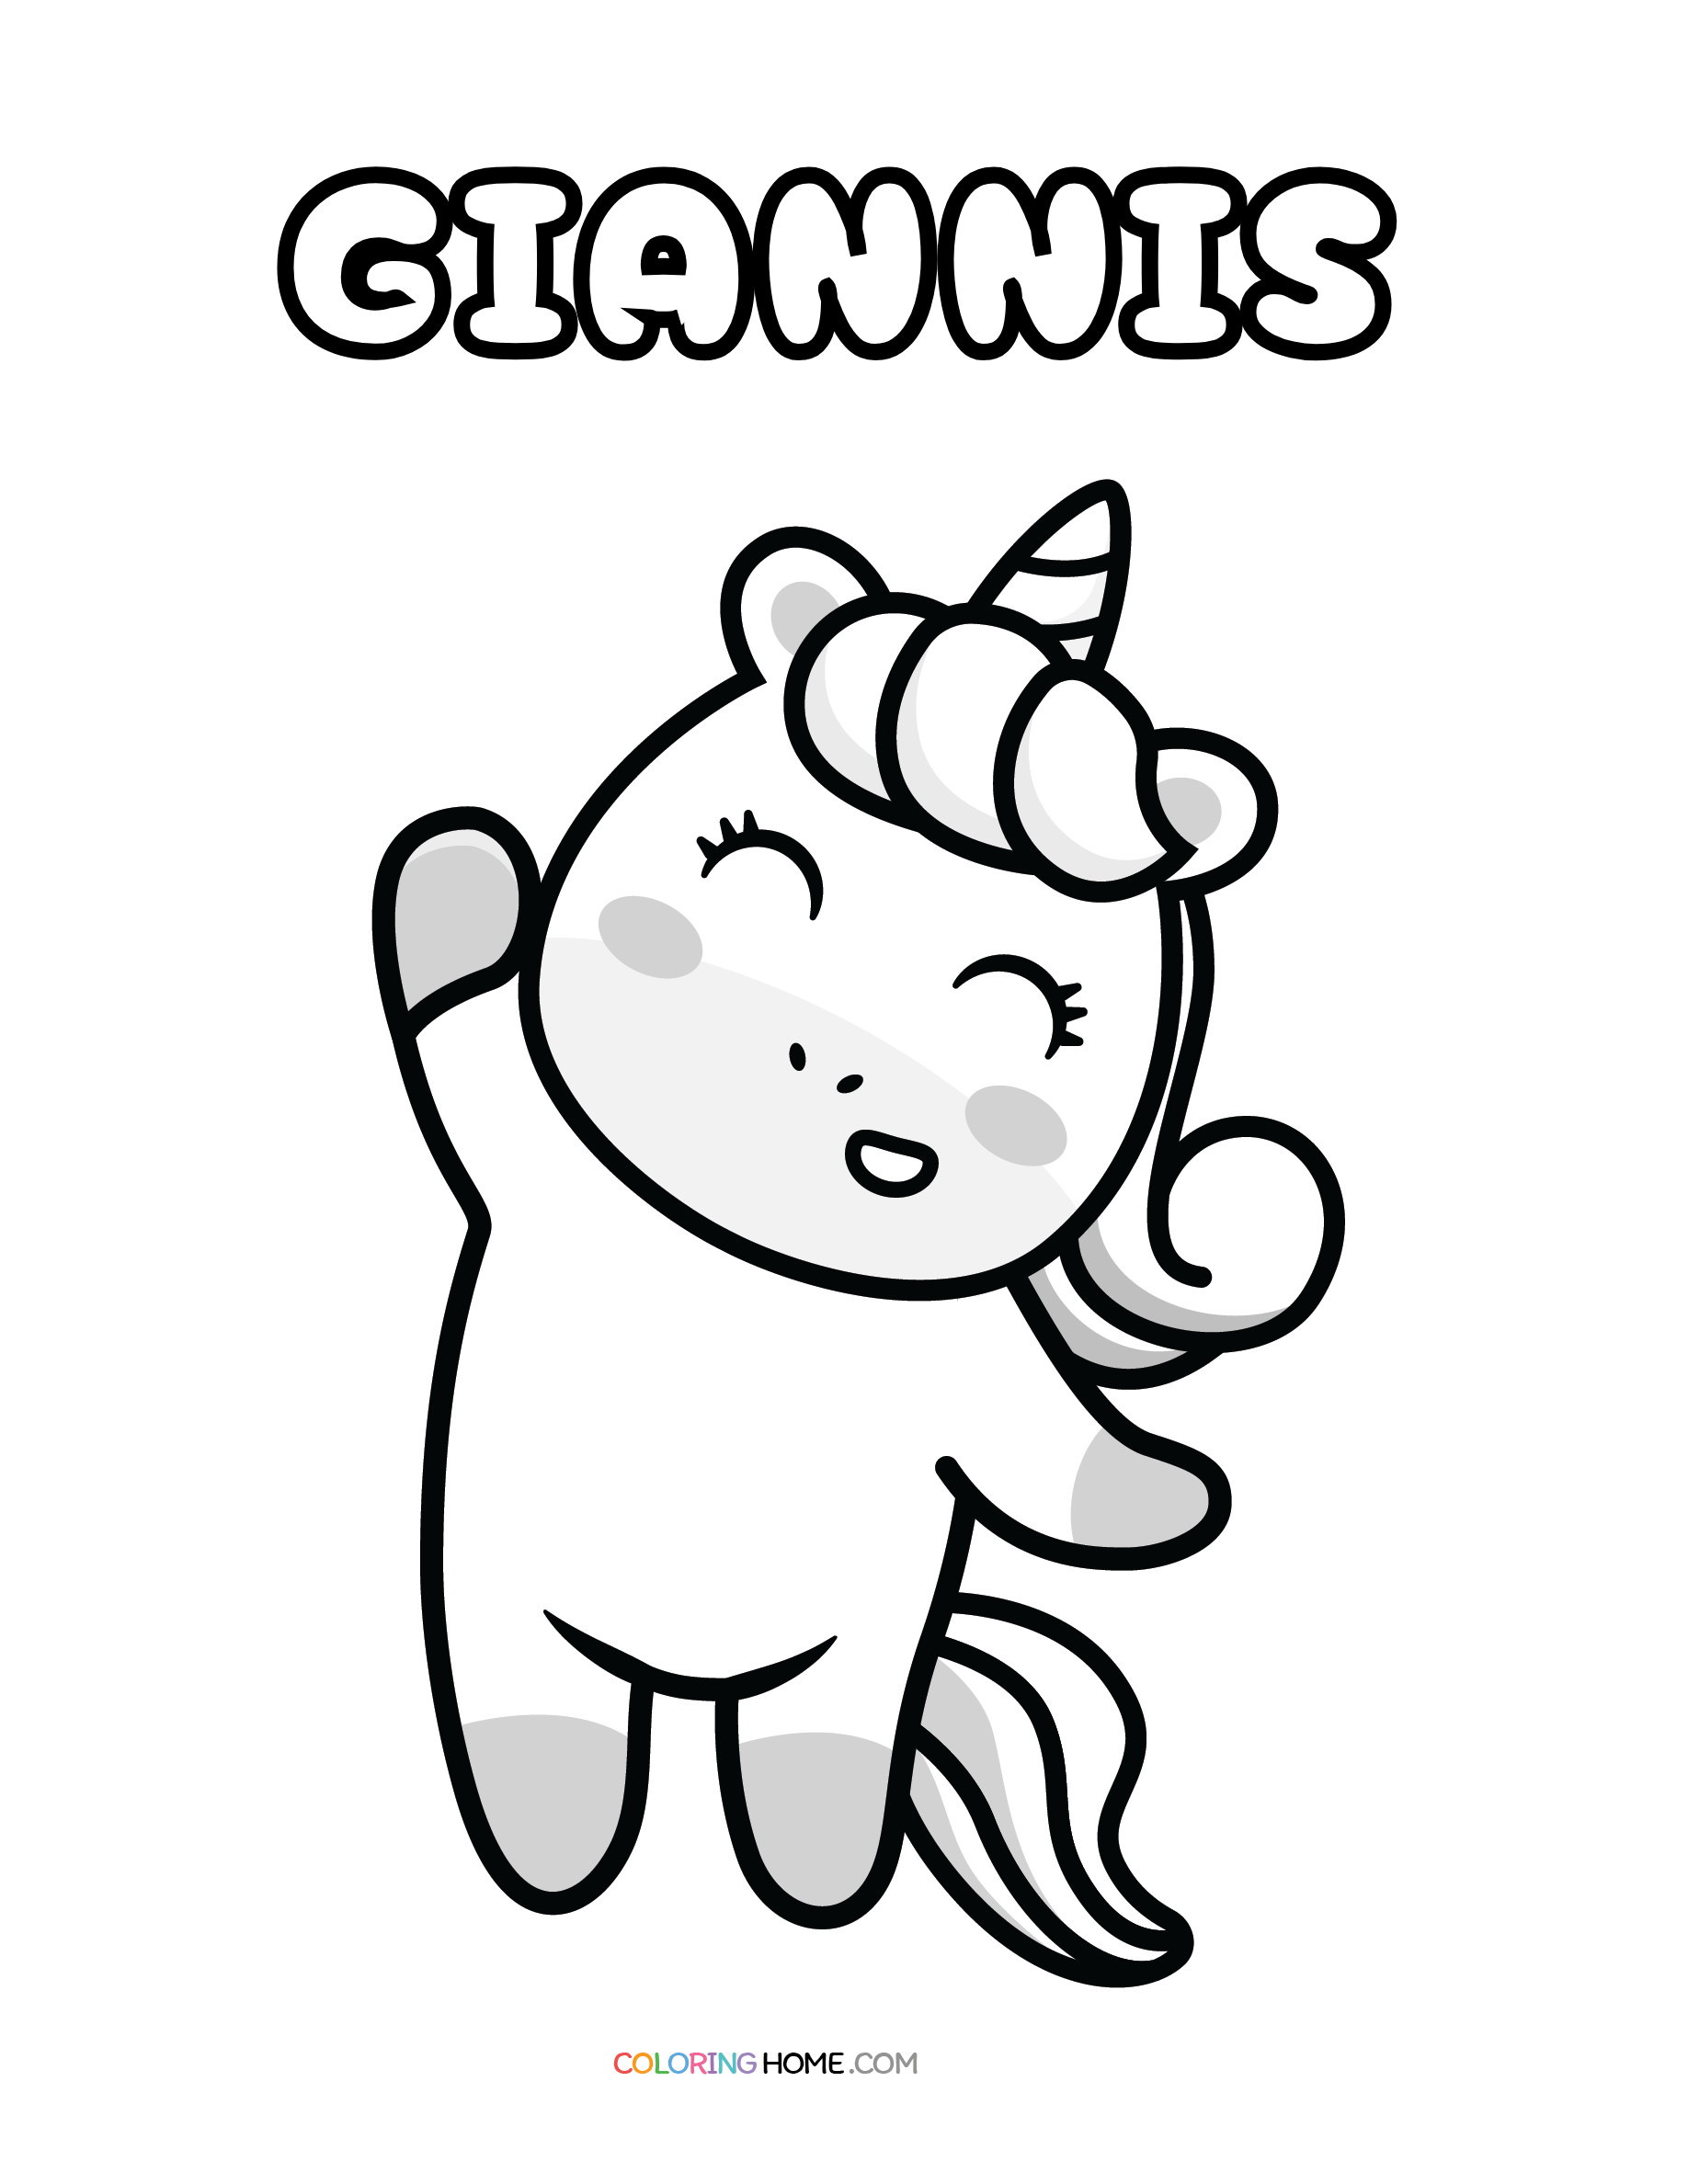 Giannis unicorn coloring page